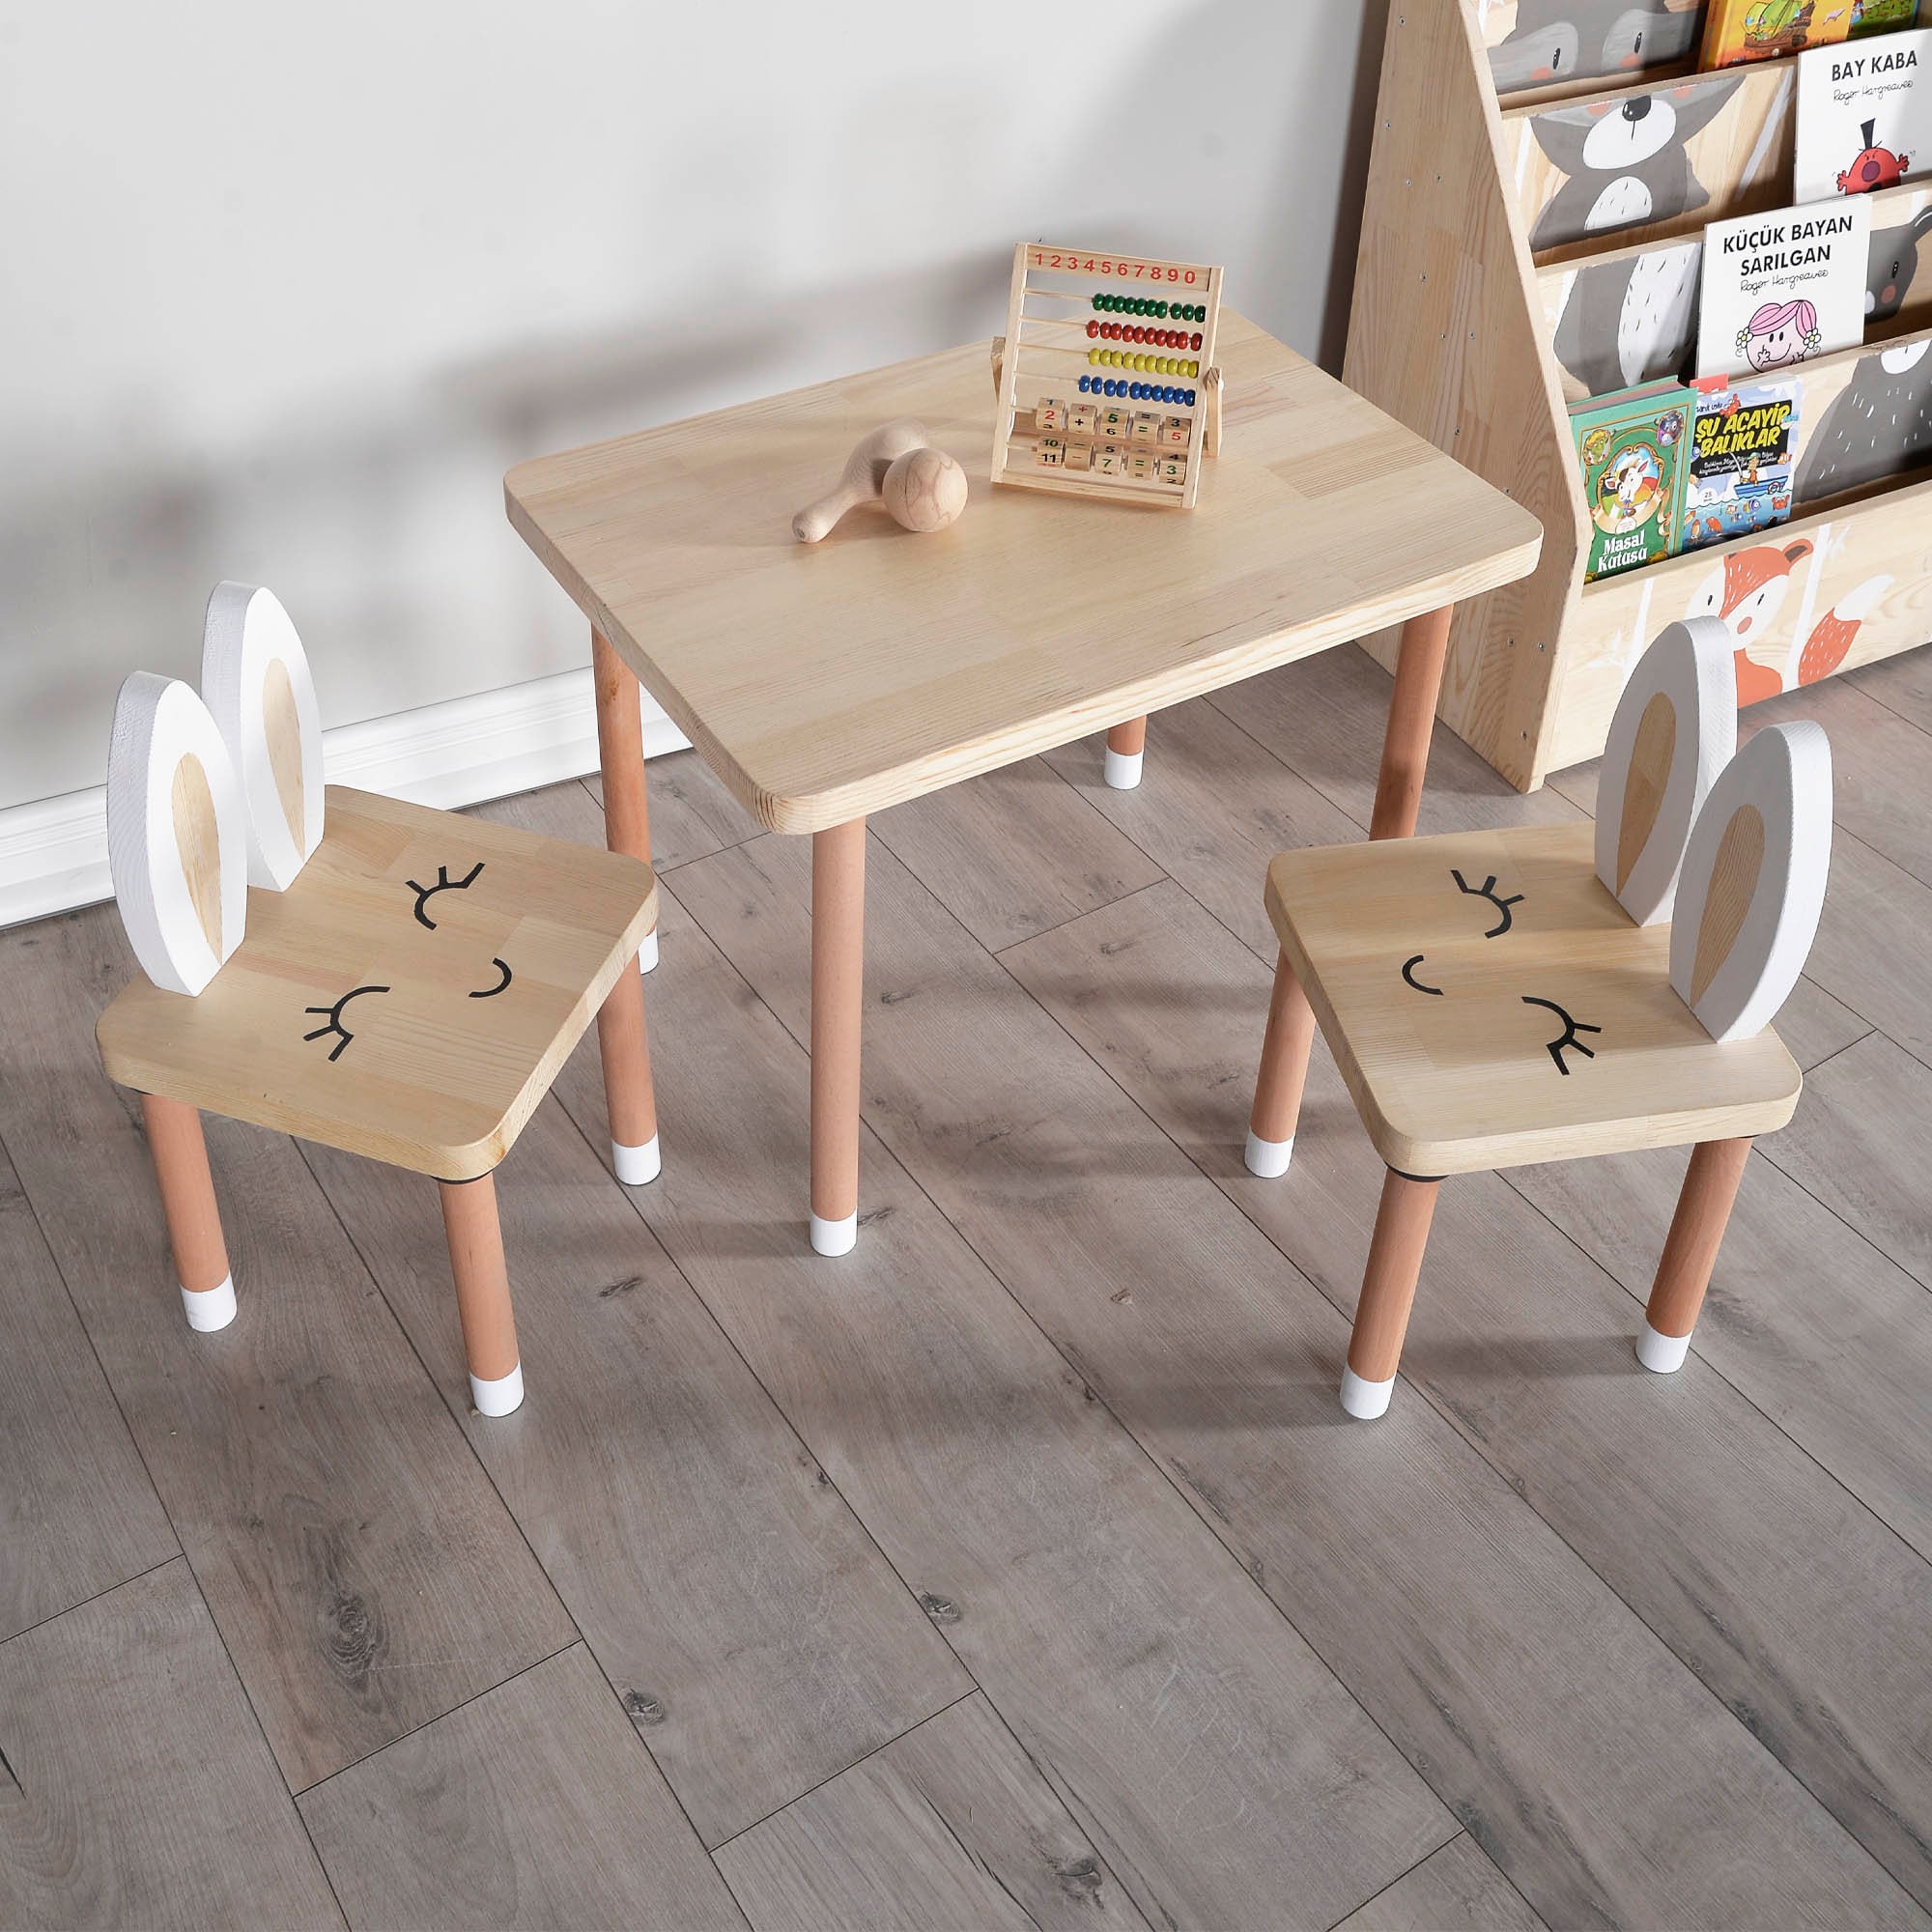 The Best Kids' Table and Chair Sets: Tender Leaf Toys, IKEA